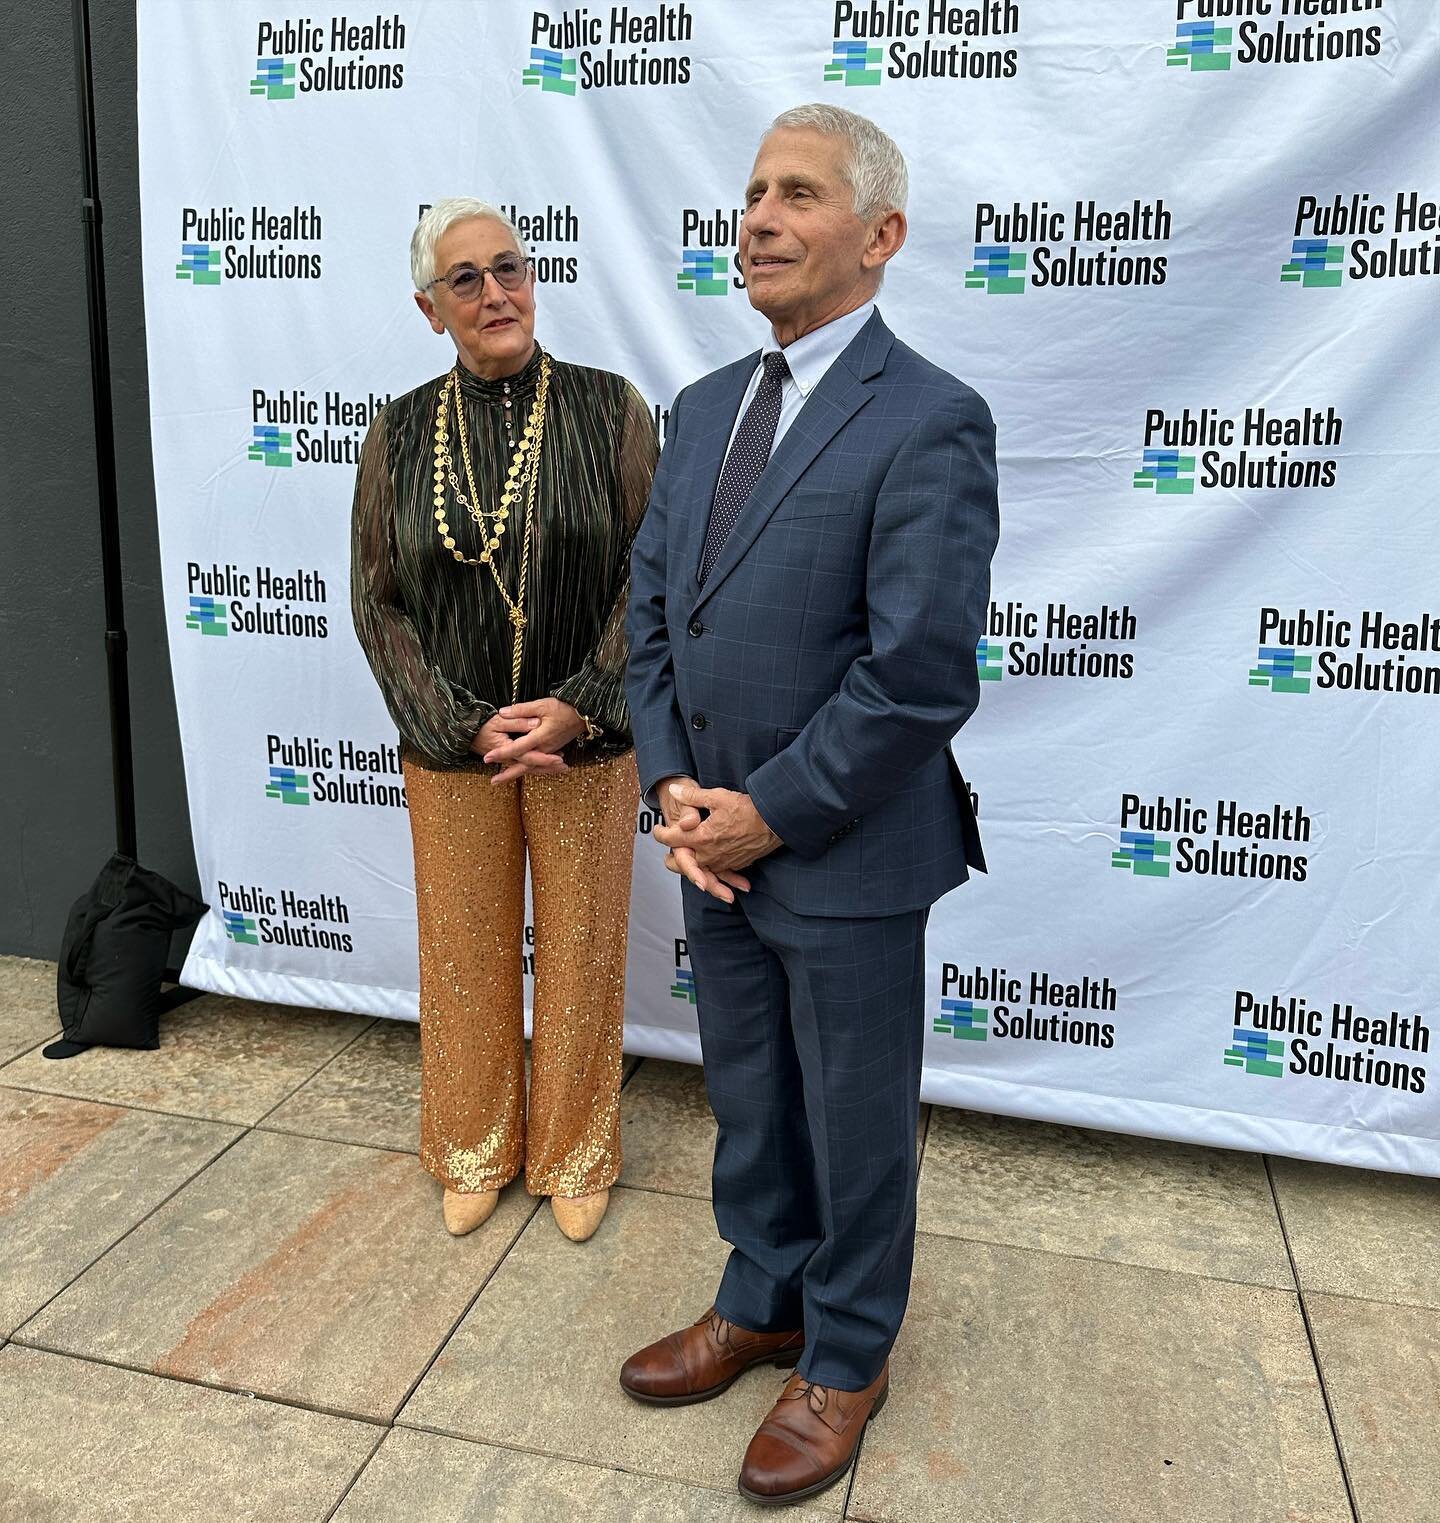 @wearephsny honoring Dr. Anthony Fauci, Former Director of the National Institute of Allergy and Infectious Disease (NIAID) and Chief Medical Advisor to the President

#fauci #nyc #publichealth